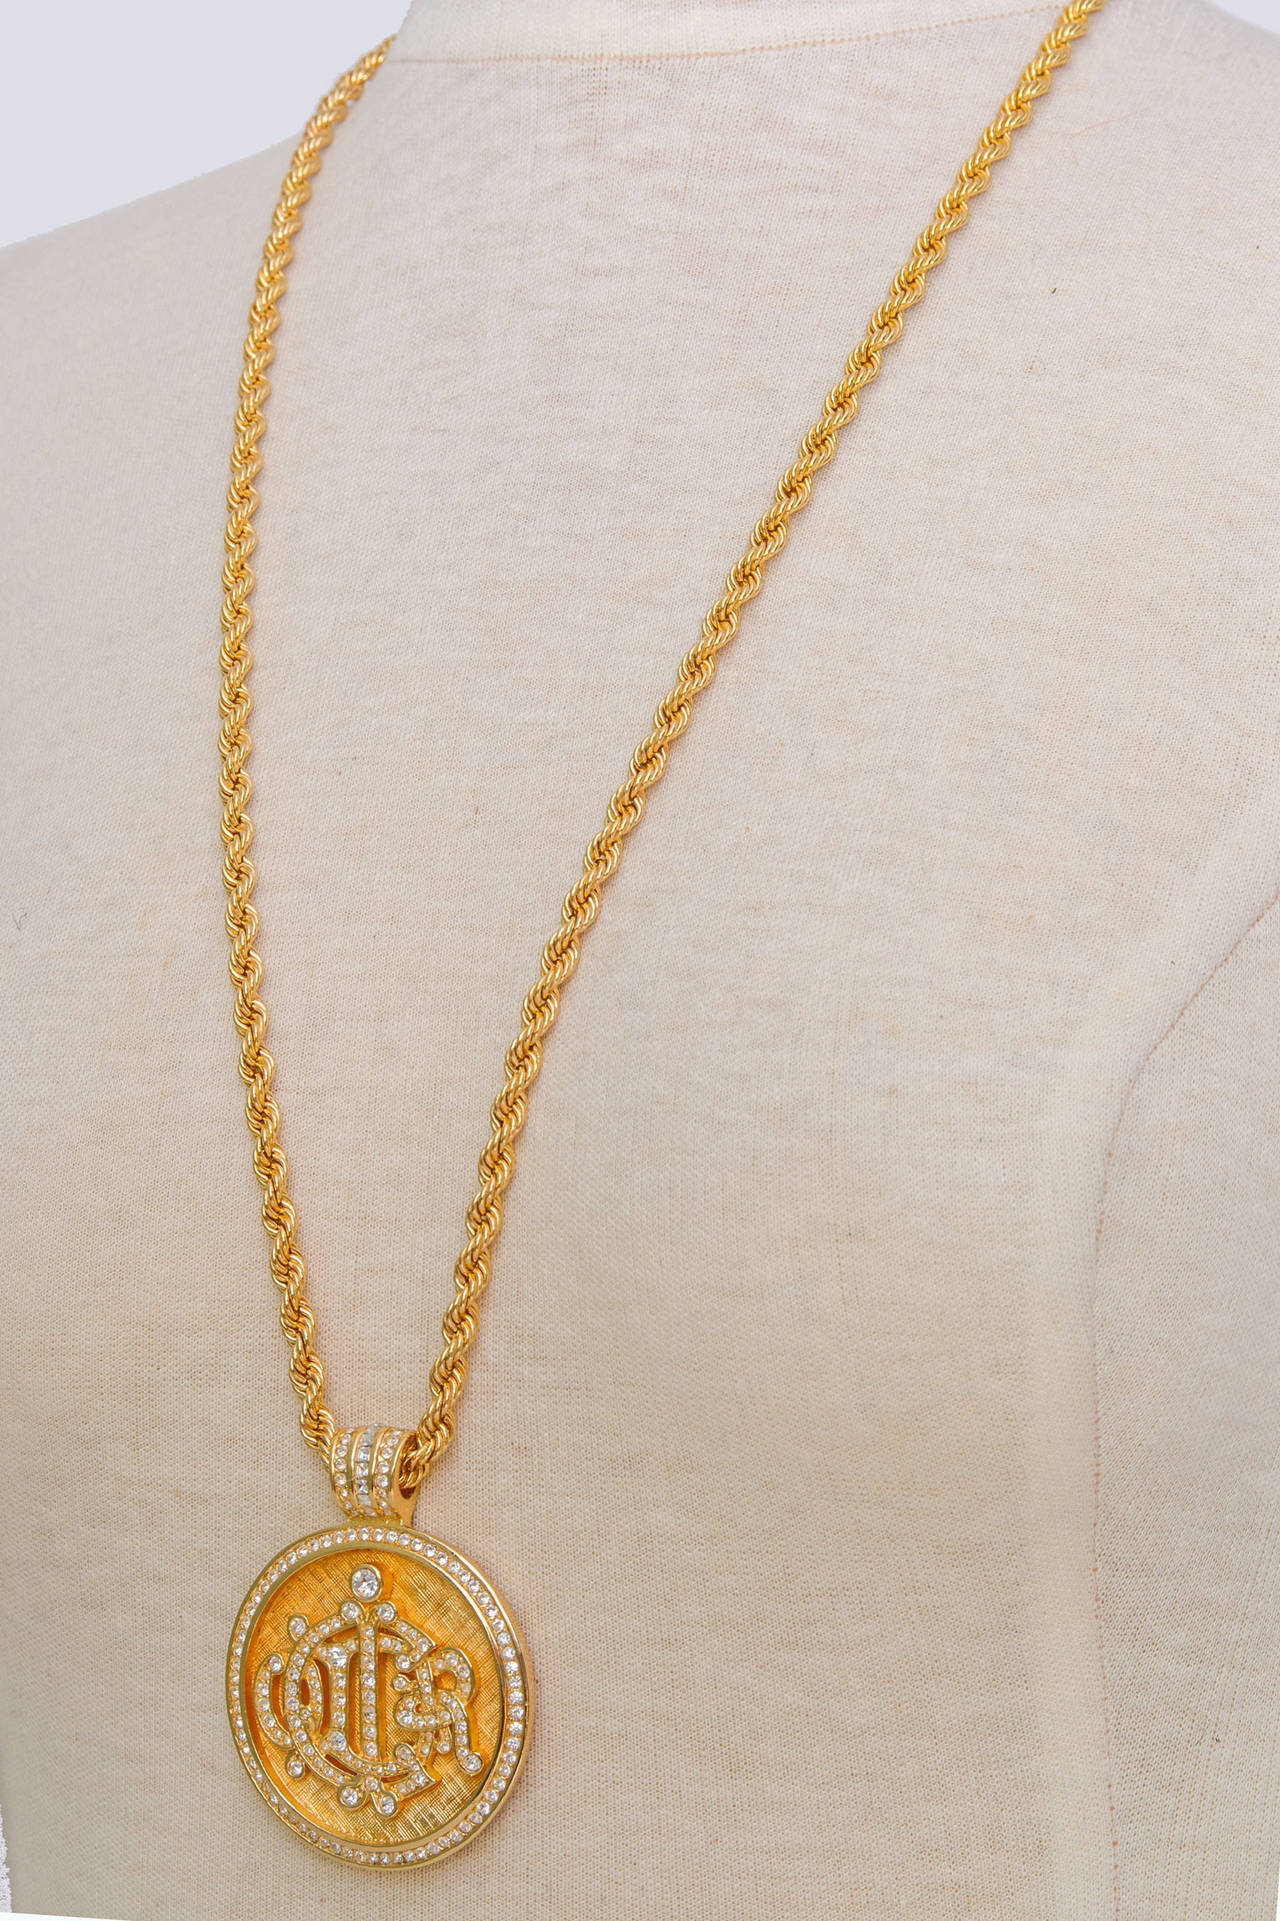 A 1980s Christian Dior gold chain necklace with a large round rhinestone studded pendent with C. Dior imprint on the centre front. The pendent measures 5x5 cm in diameter.

The necklace is stamped: Chr. Dior on the back of the pendent and on the